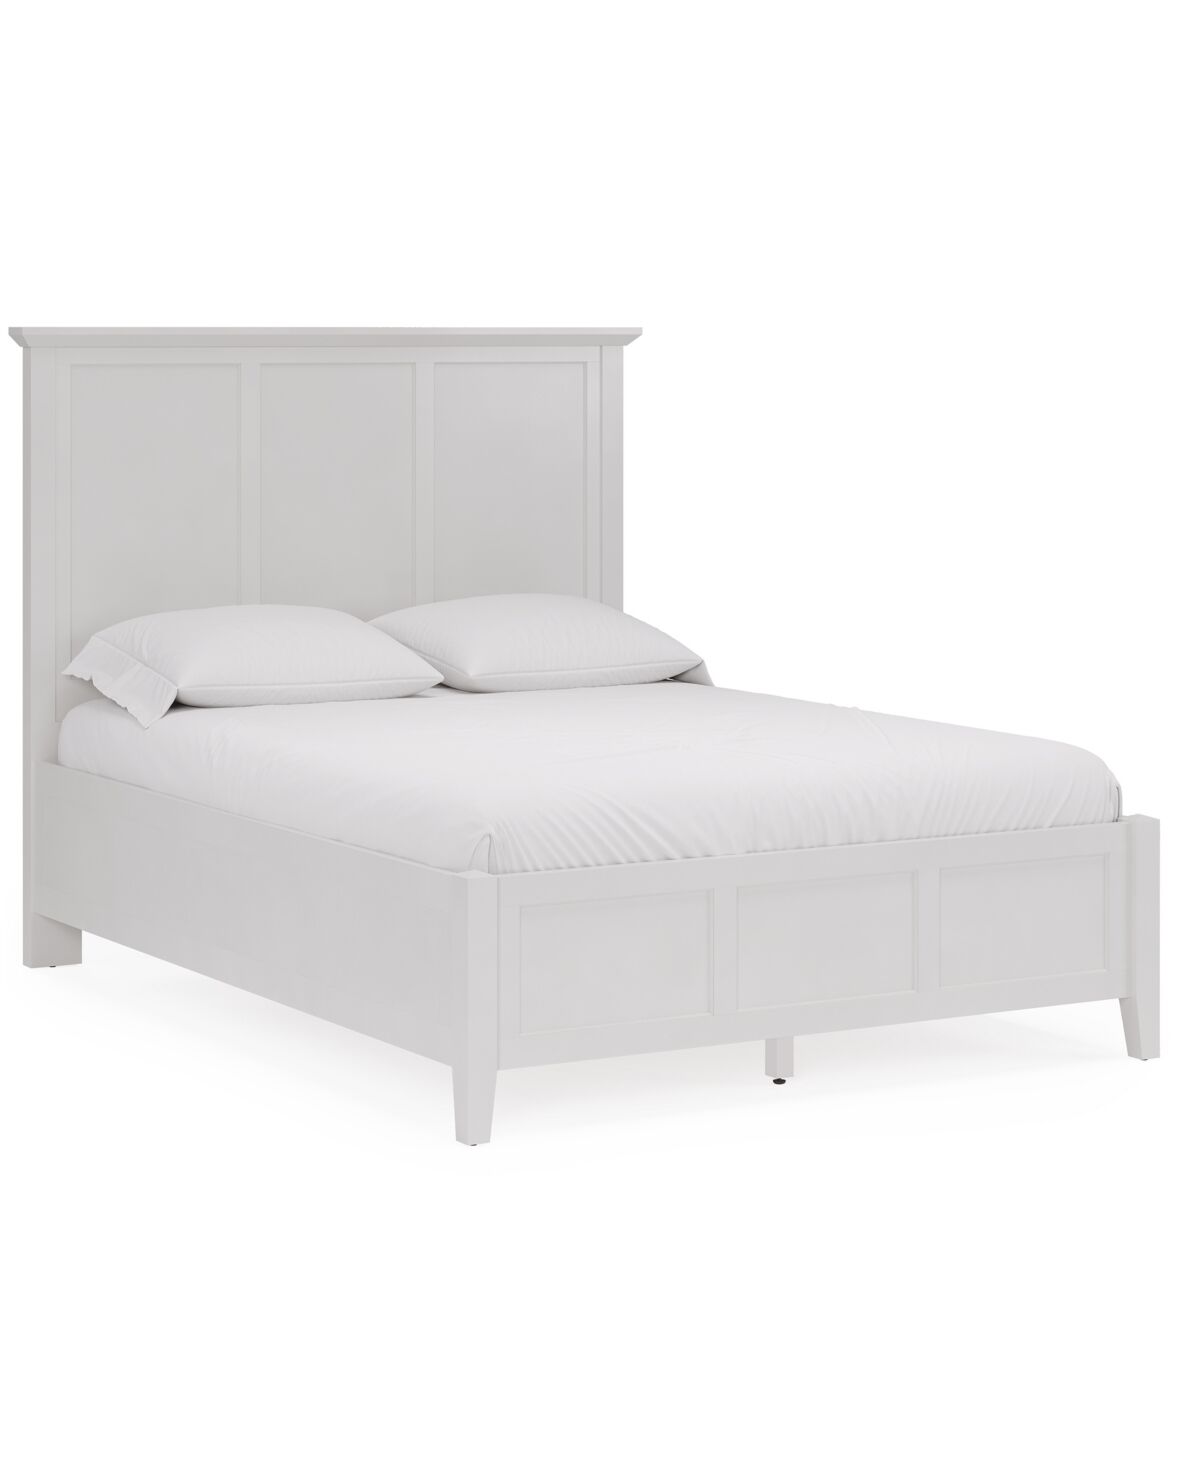 Furniture Hedworth Queen Bed - White